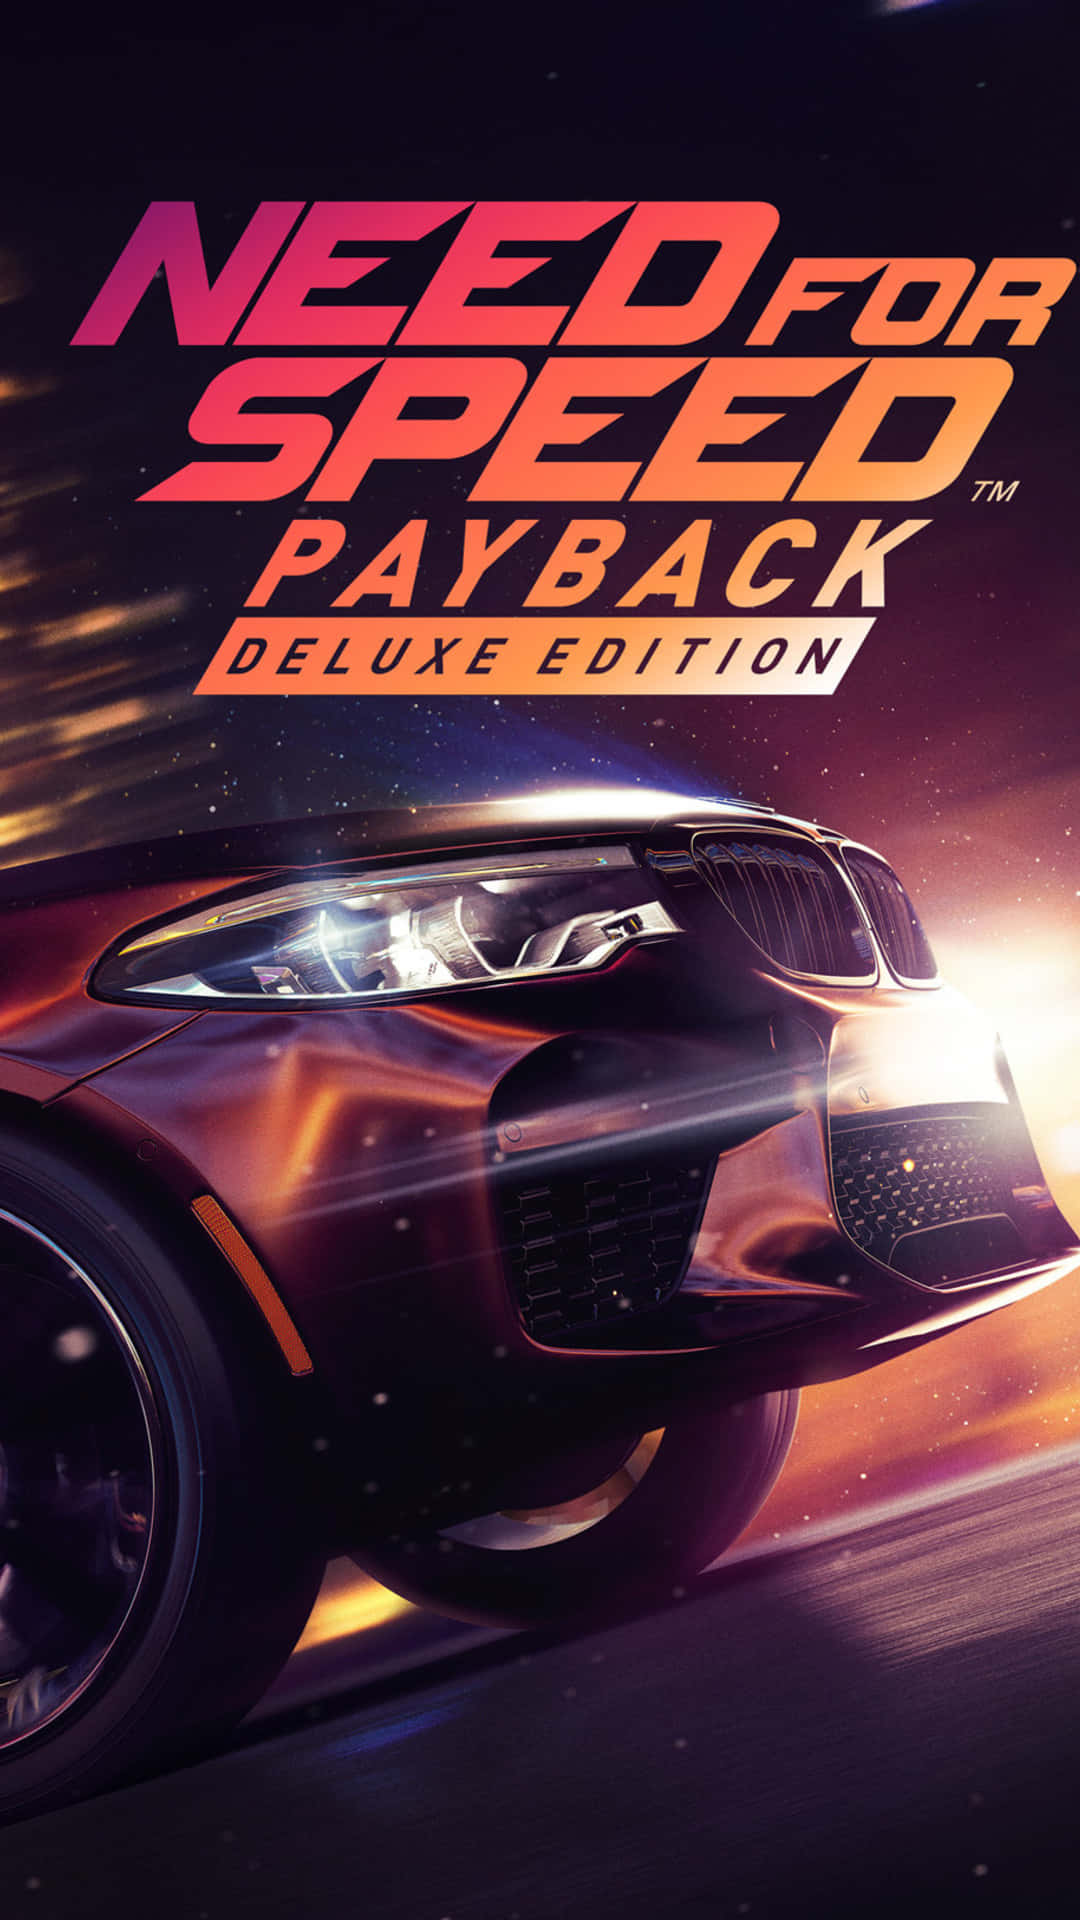 Pixel3 Hintergrundbild Need For Speed Payback Deluxe Edition Cover